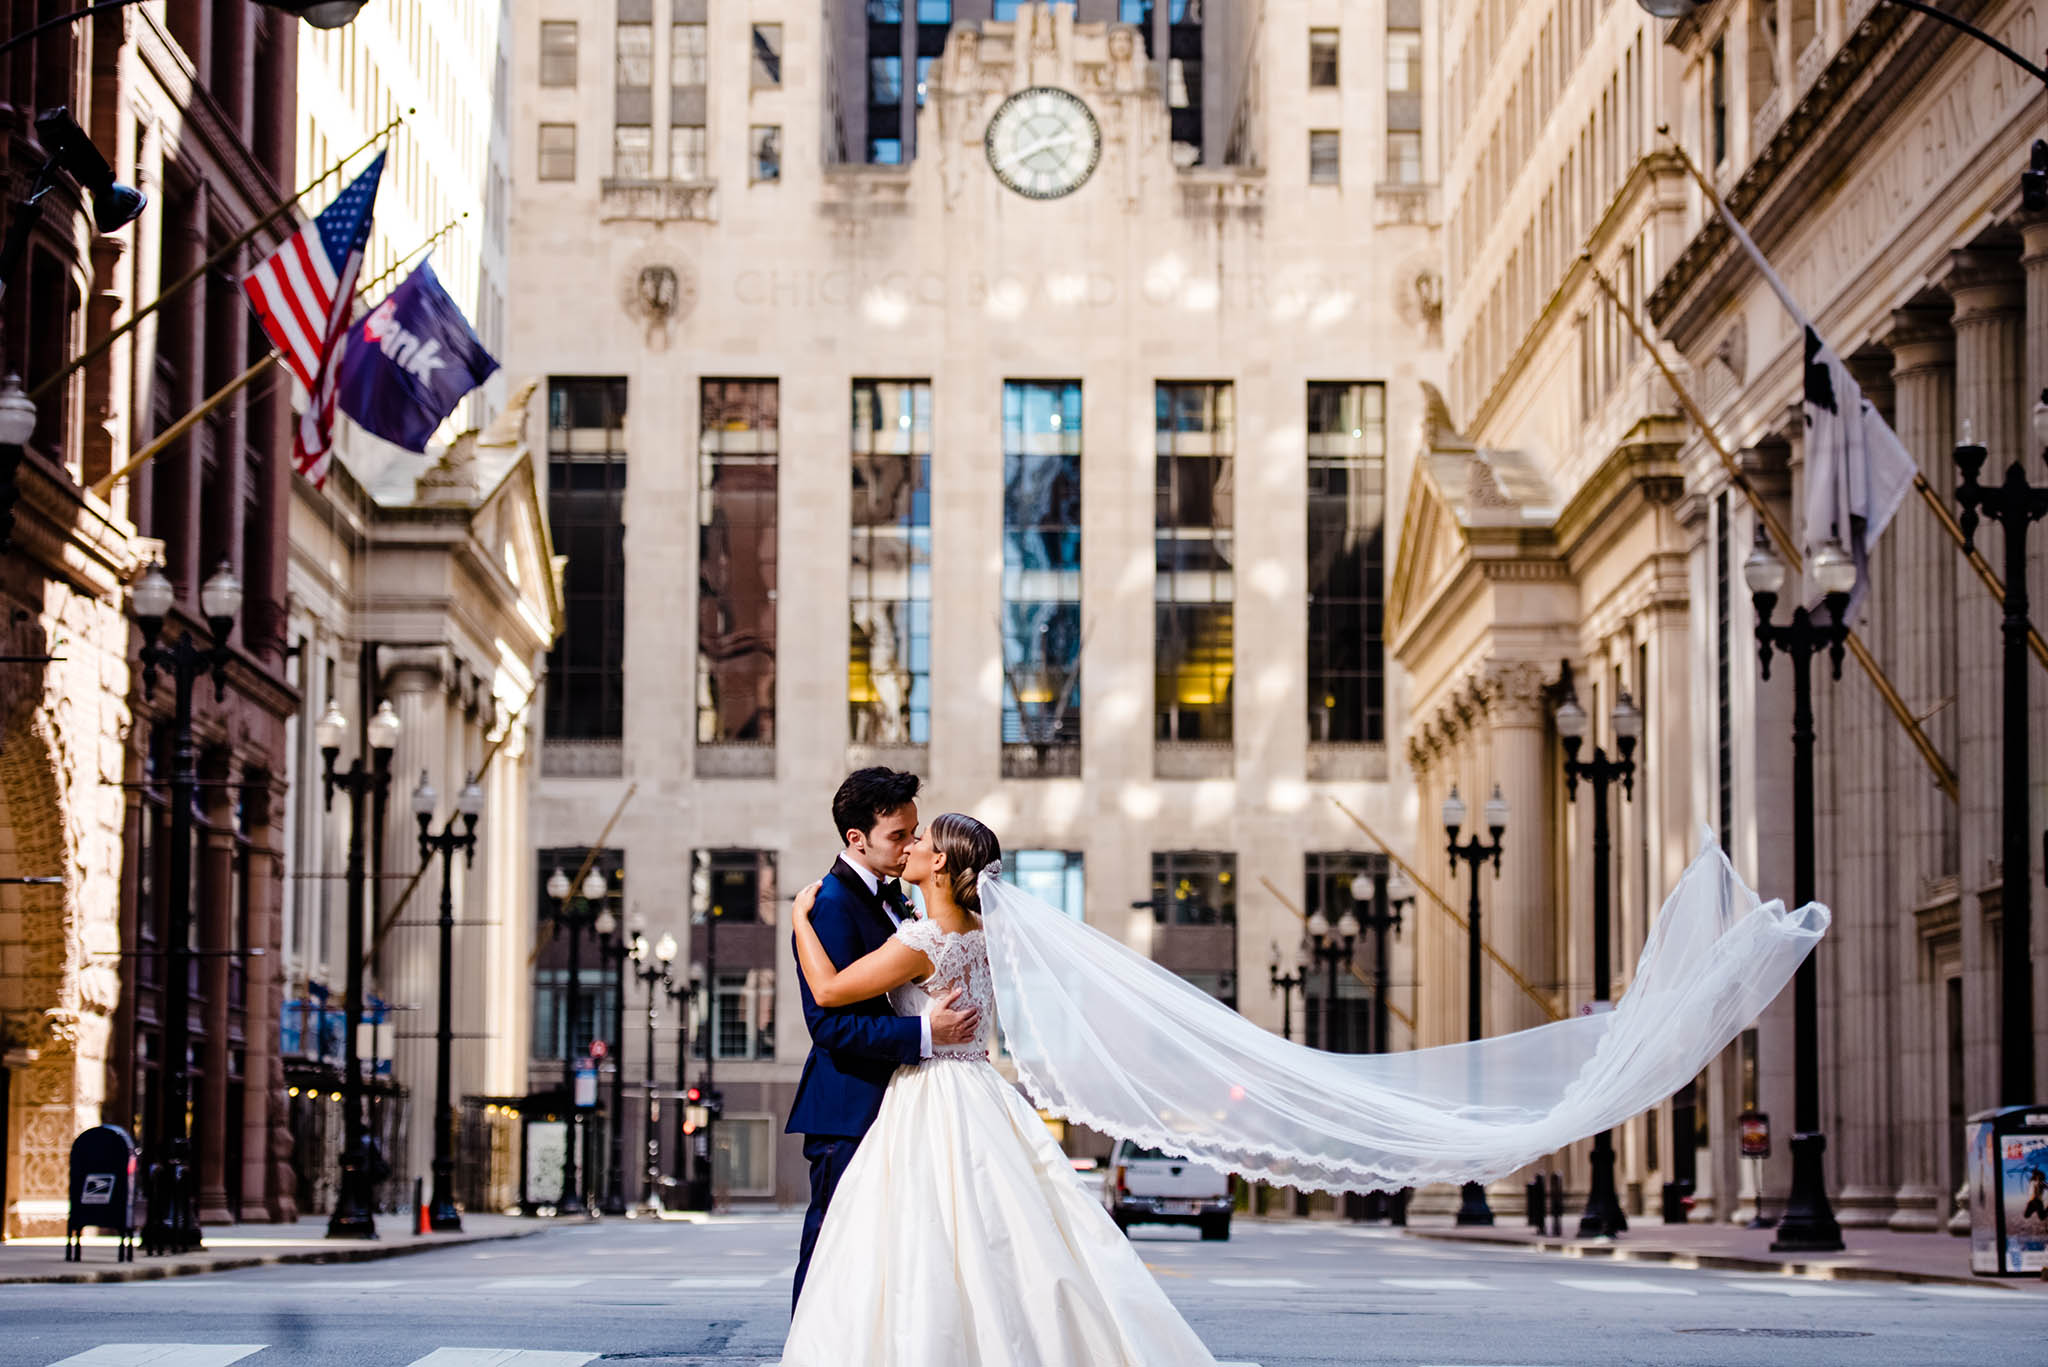 Lincoln Square wedding photographer - Chicago